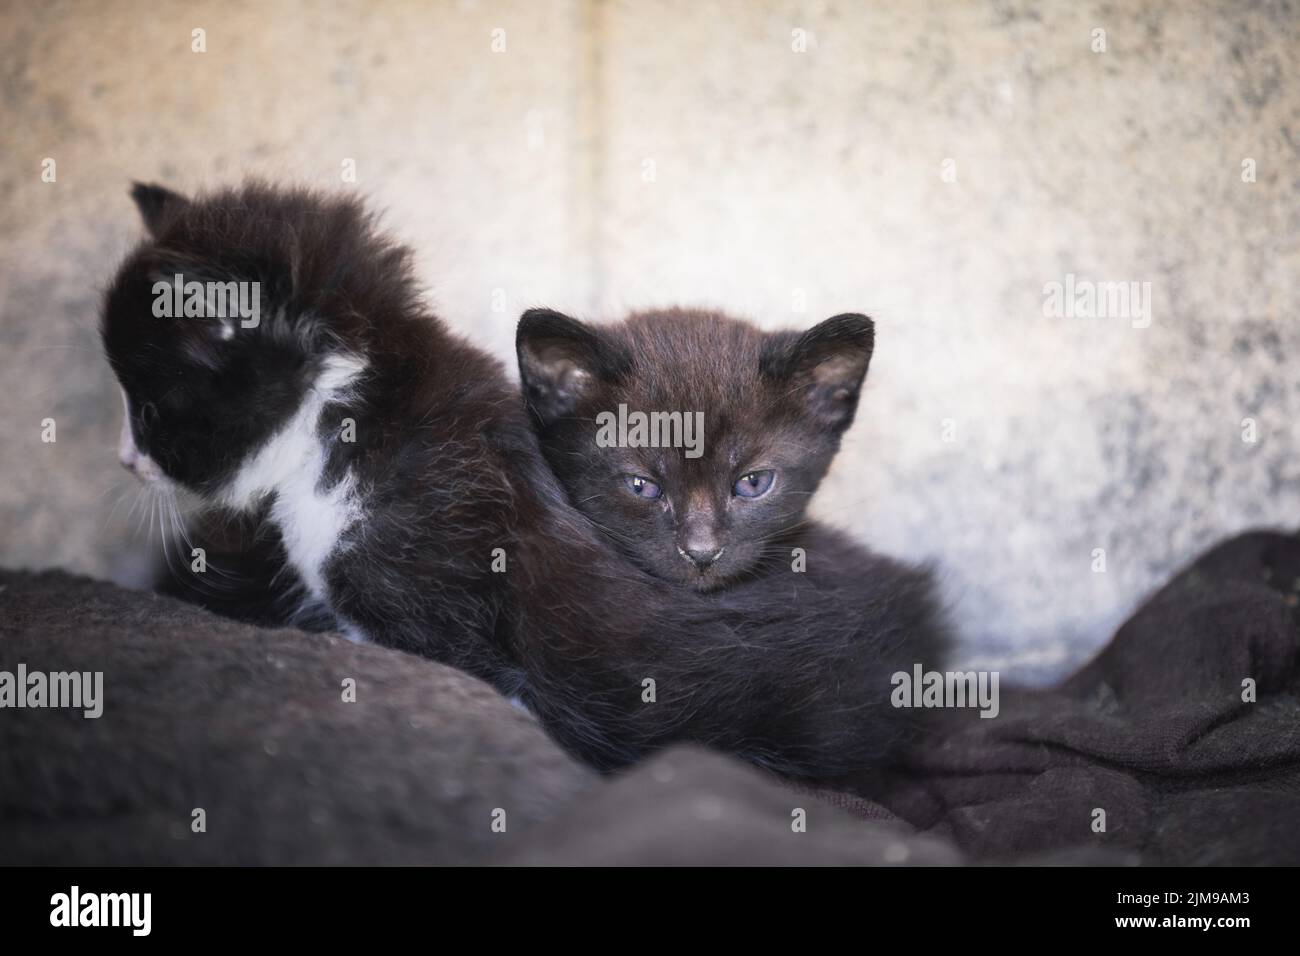 Small kittens sitting together Stock Photo